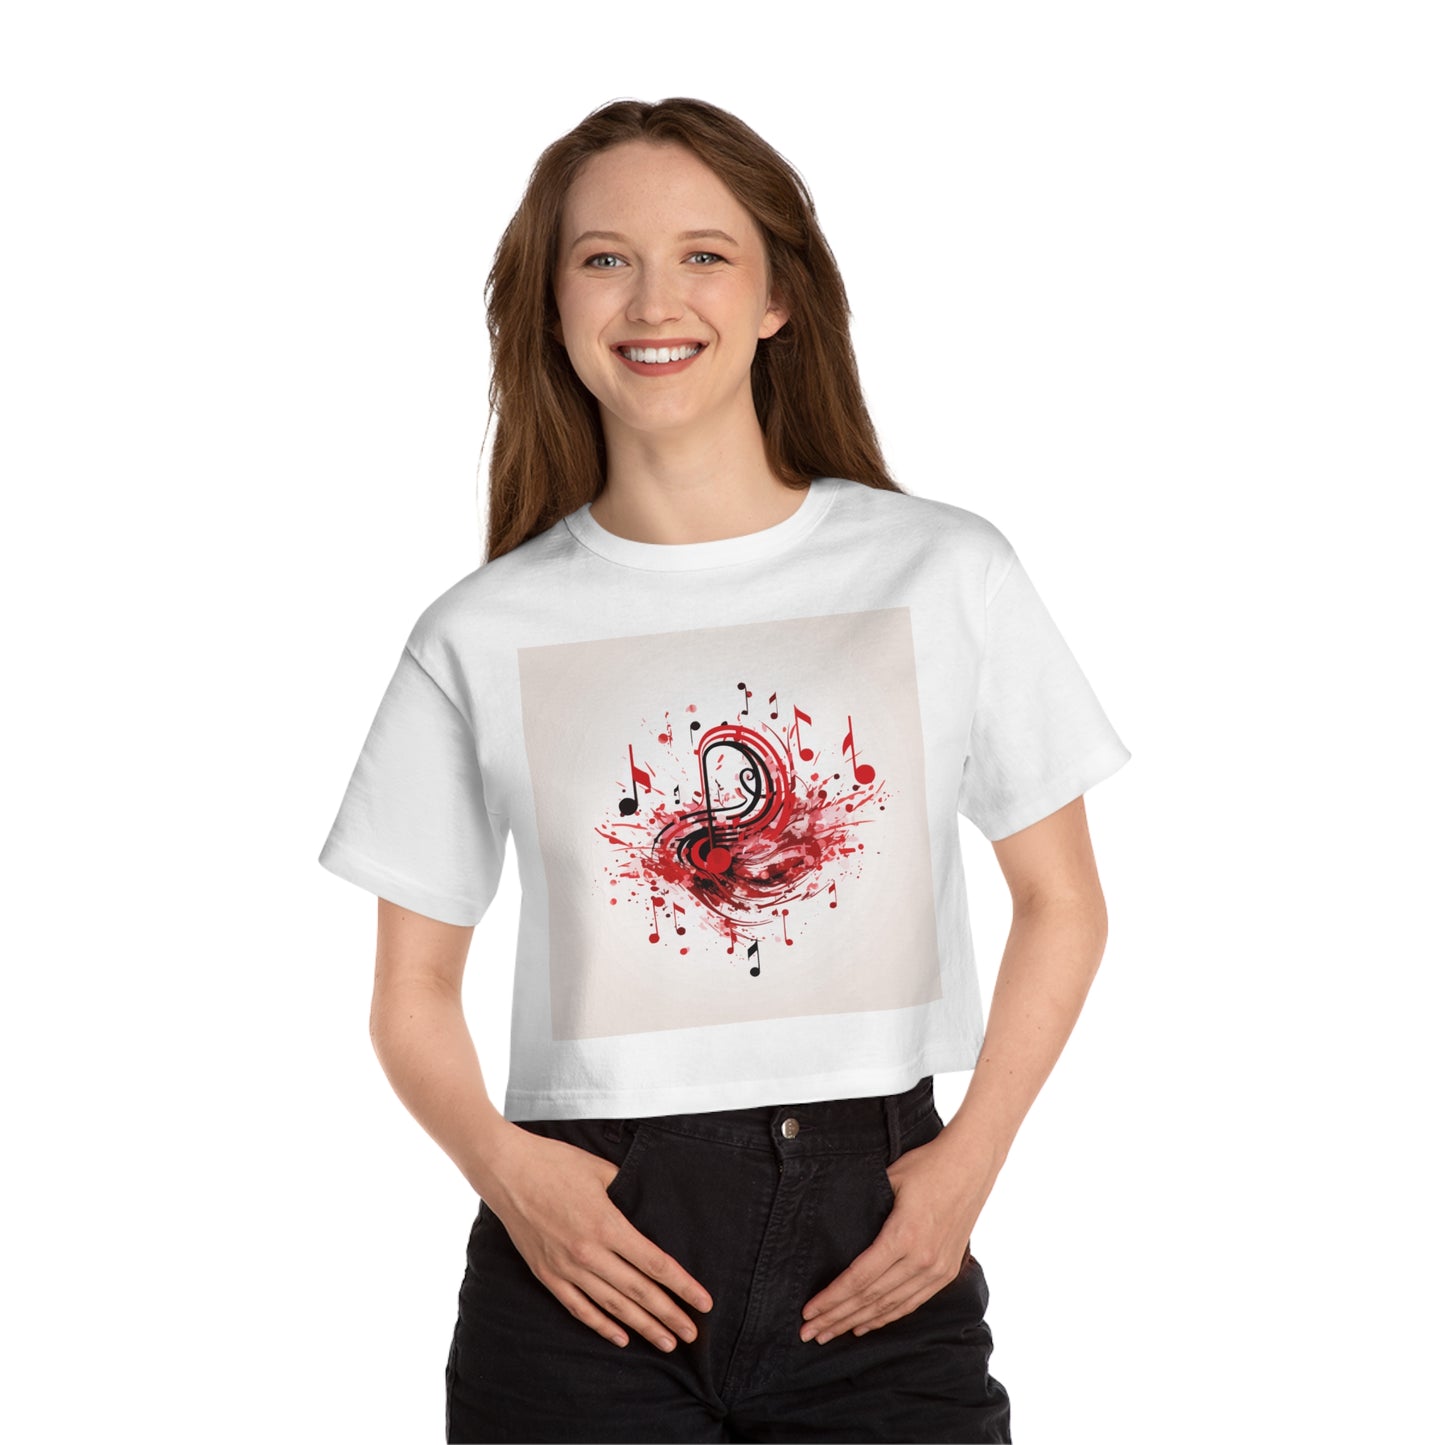 Valentine's and musical combination Champion Women's Heritage Cropped T-Shirt for valentine's day.